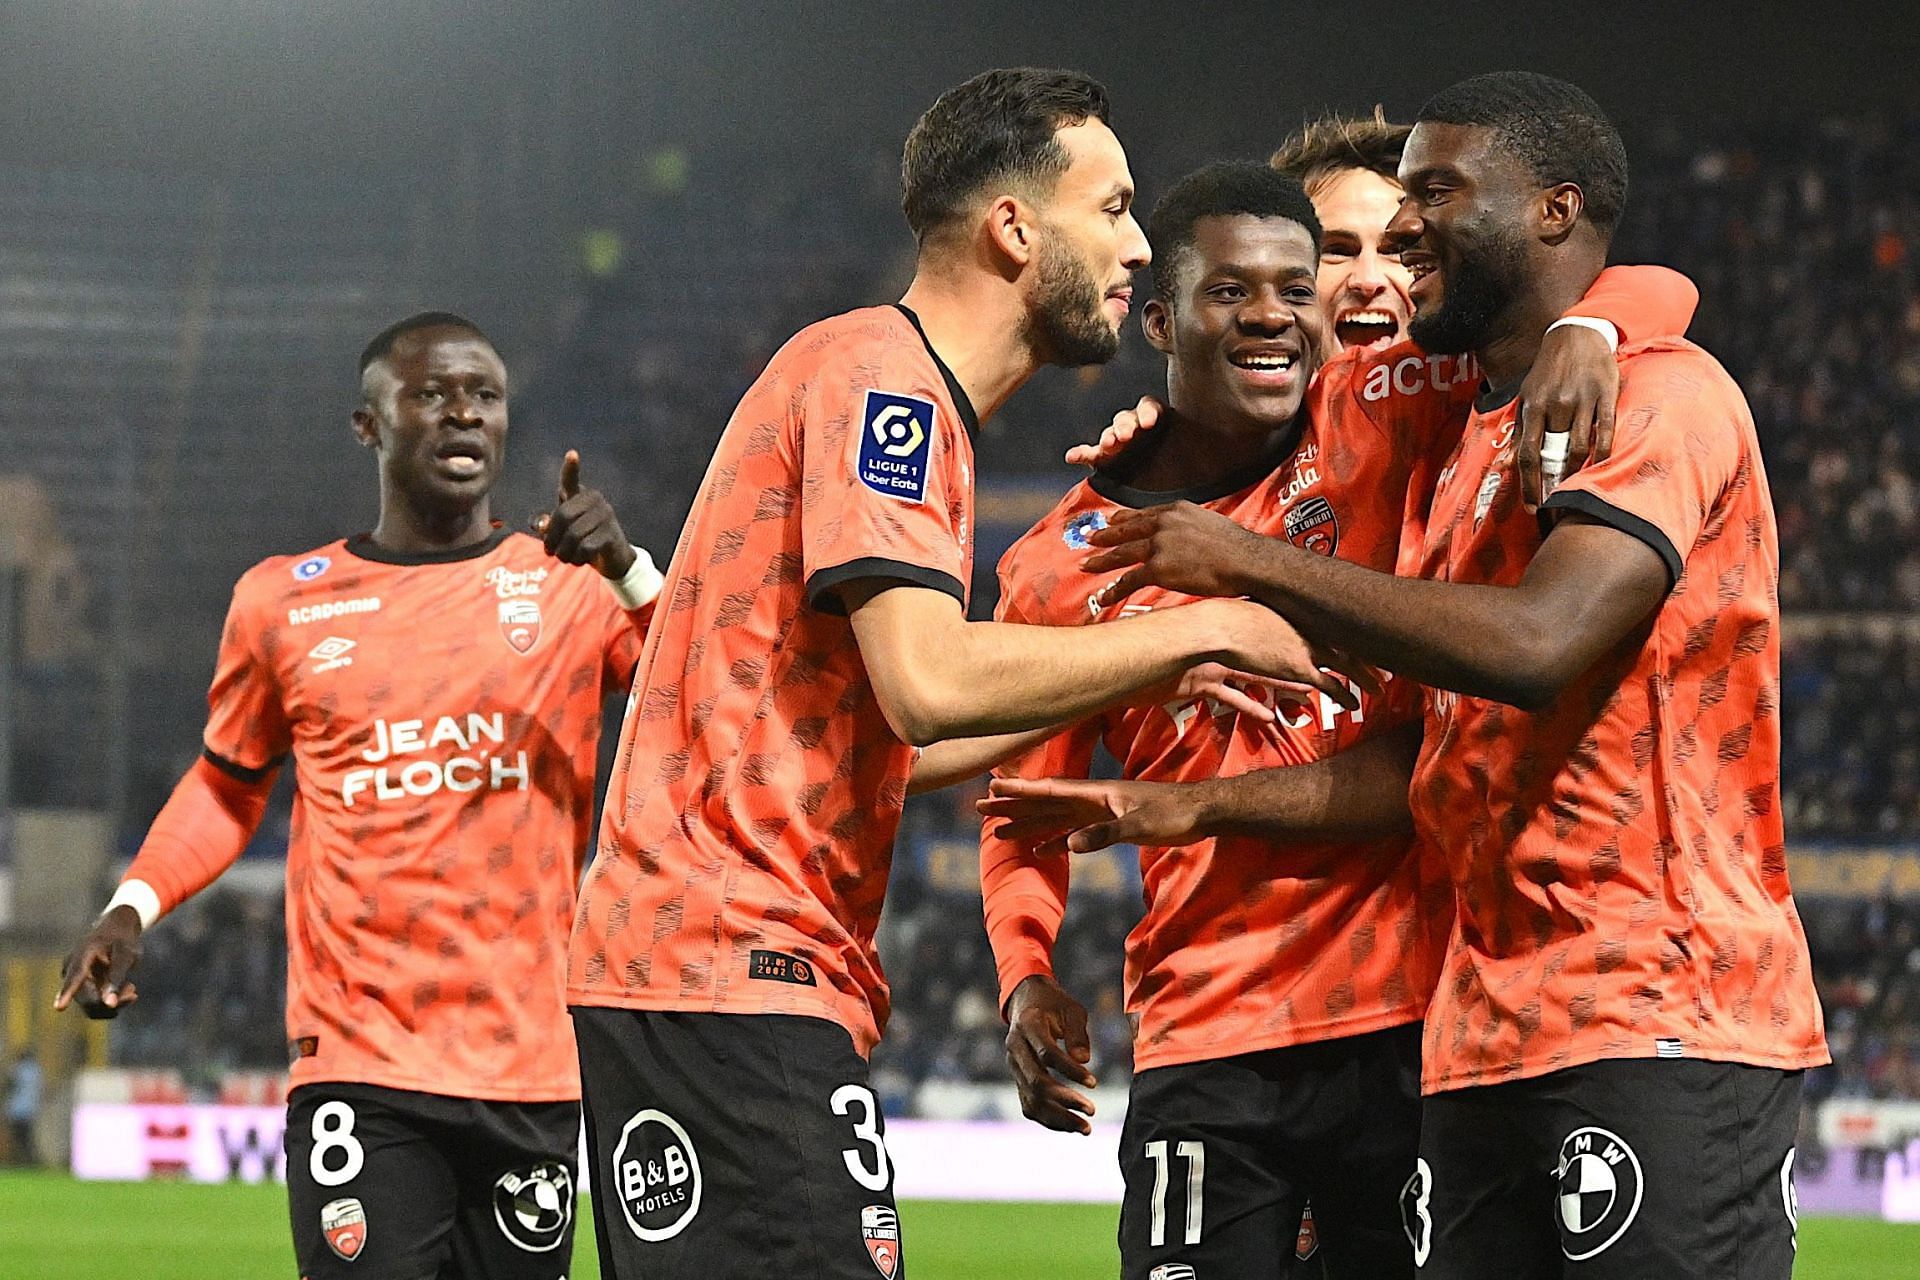 Lorient will face Montpellier on Thursday - Ligue 1